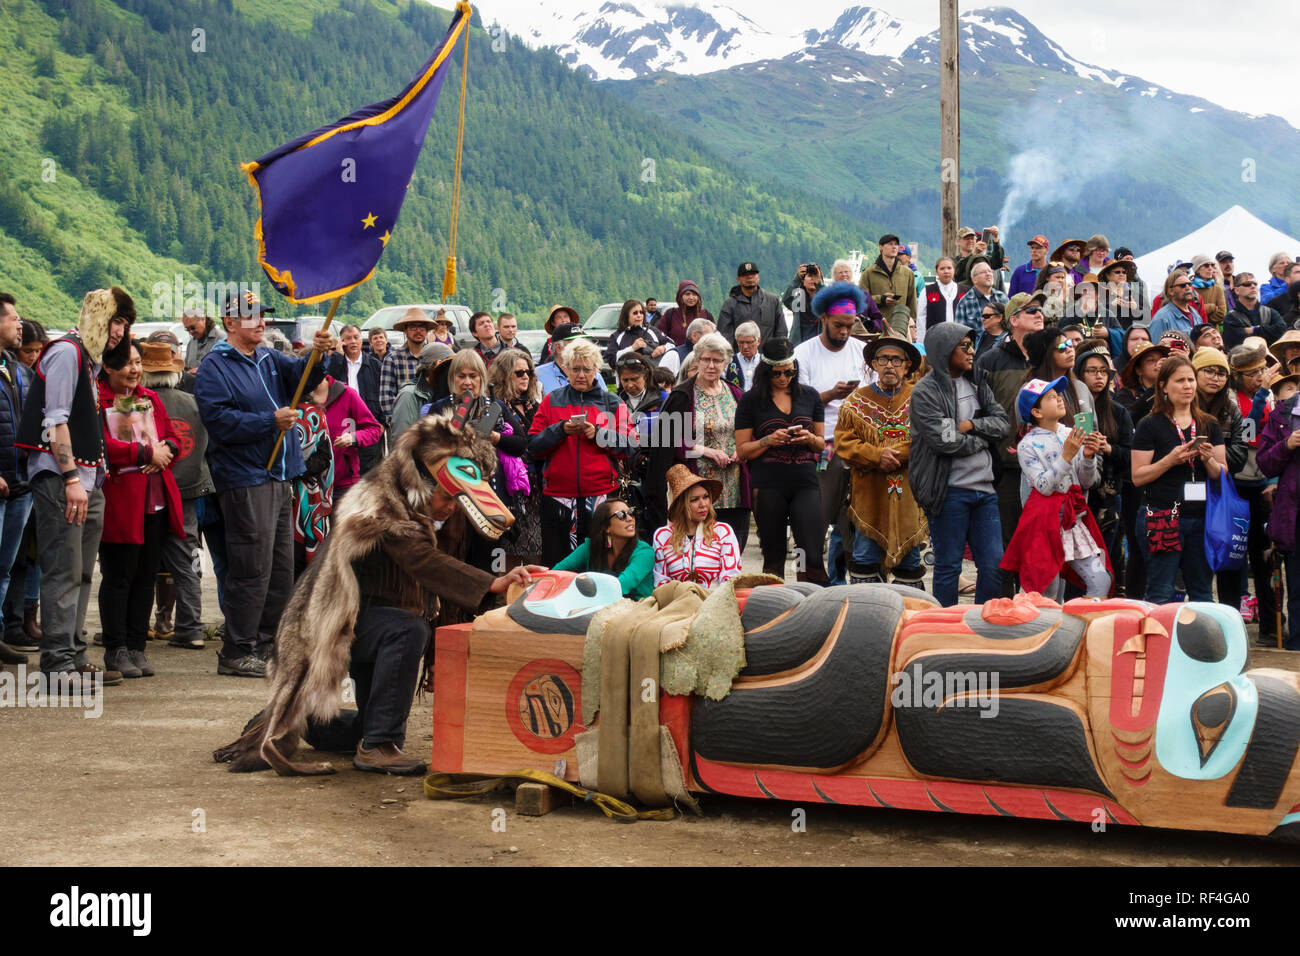 A crowd of people from the Tlingit, Tsimshian and Haida tribes gathered for a Native American Indian totem pole raising celebration, Juneau, Alaska Stock Photo